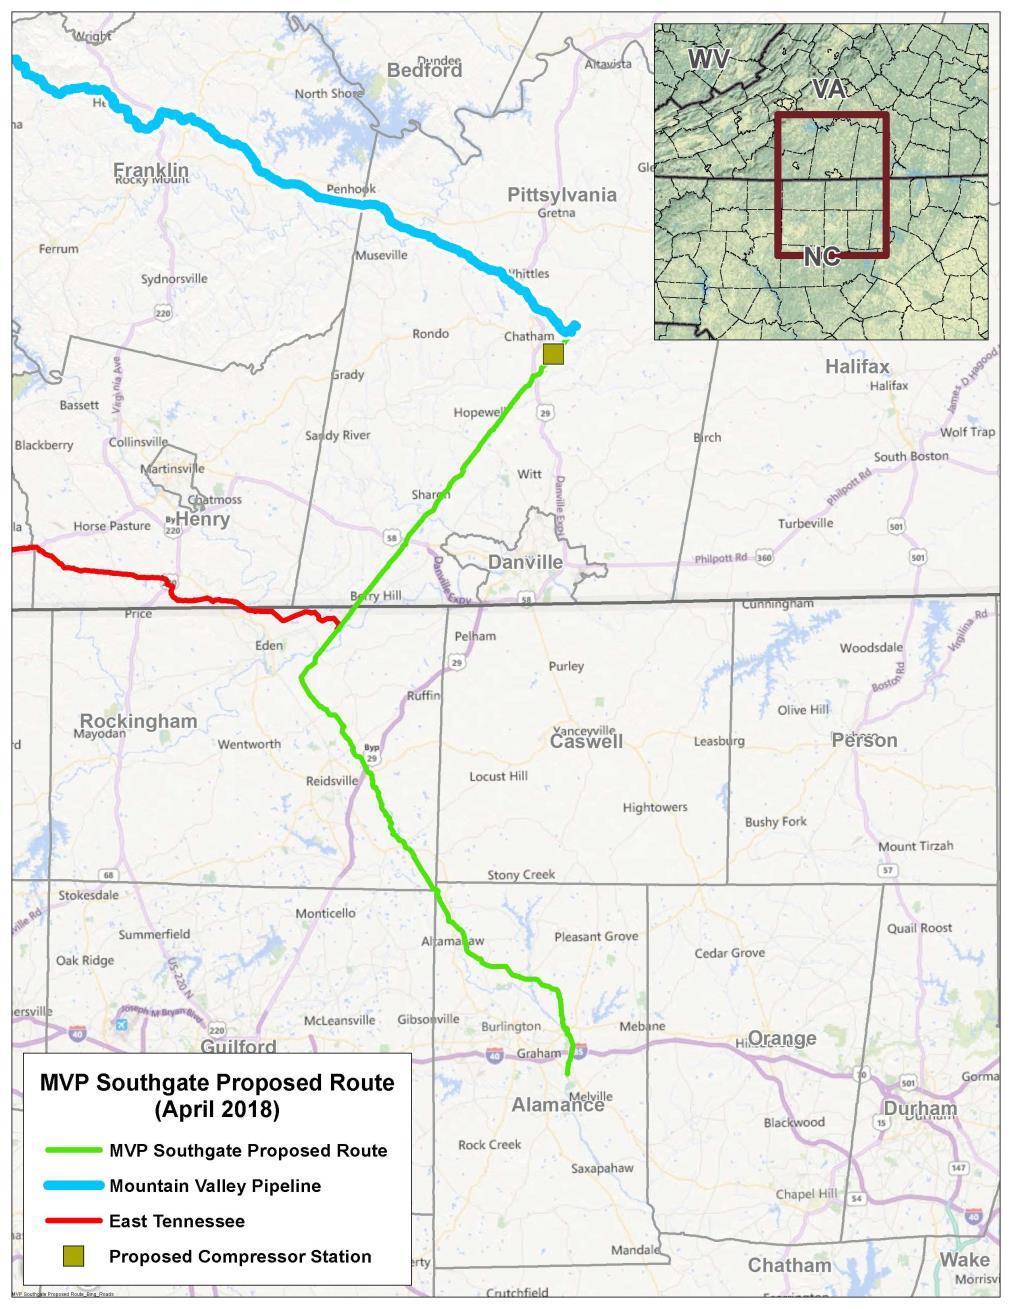 MVP Southgate Project driven by demand pull from the tailgate of MVP 70-mile extension into North Carolina PSNC Energy is anchor shipper with 300 MMcf per day firm capacity commitment Estimated